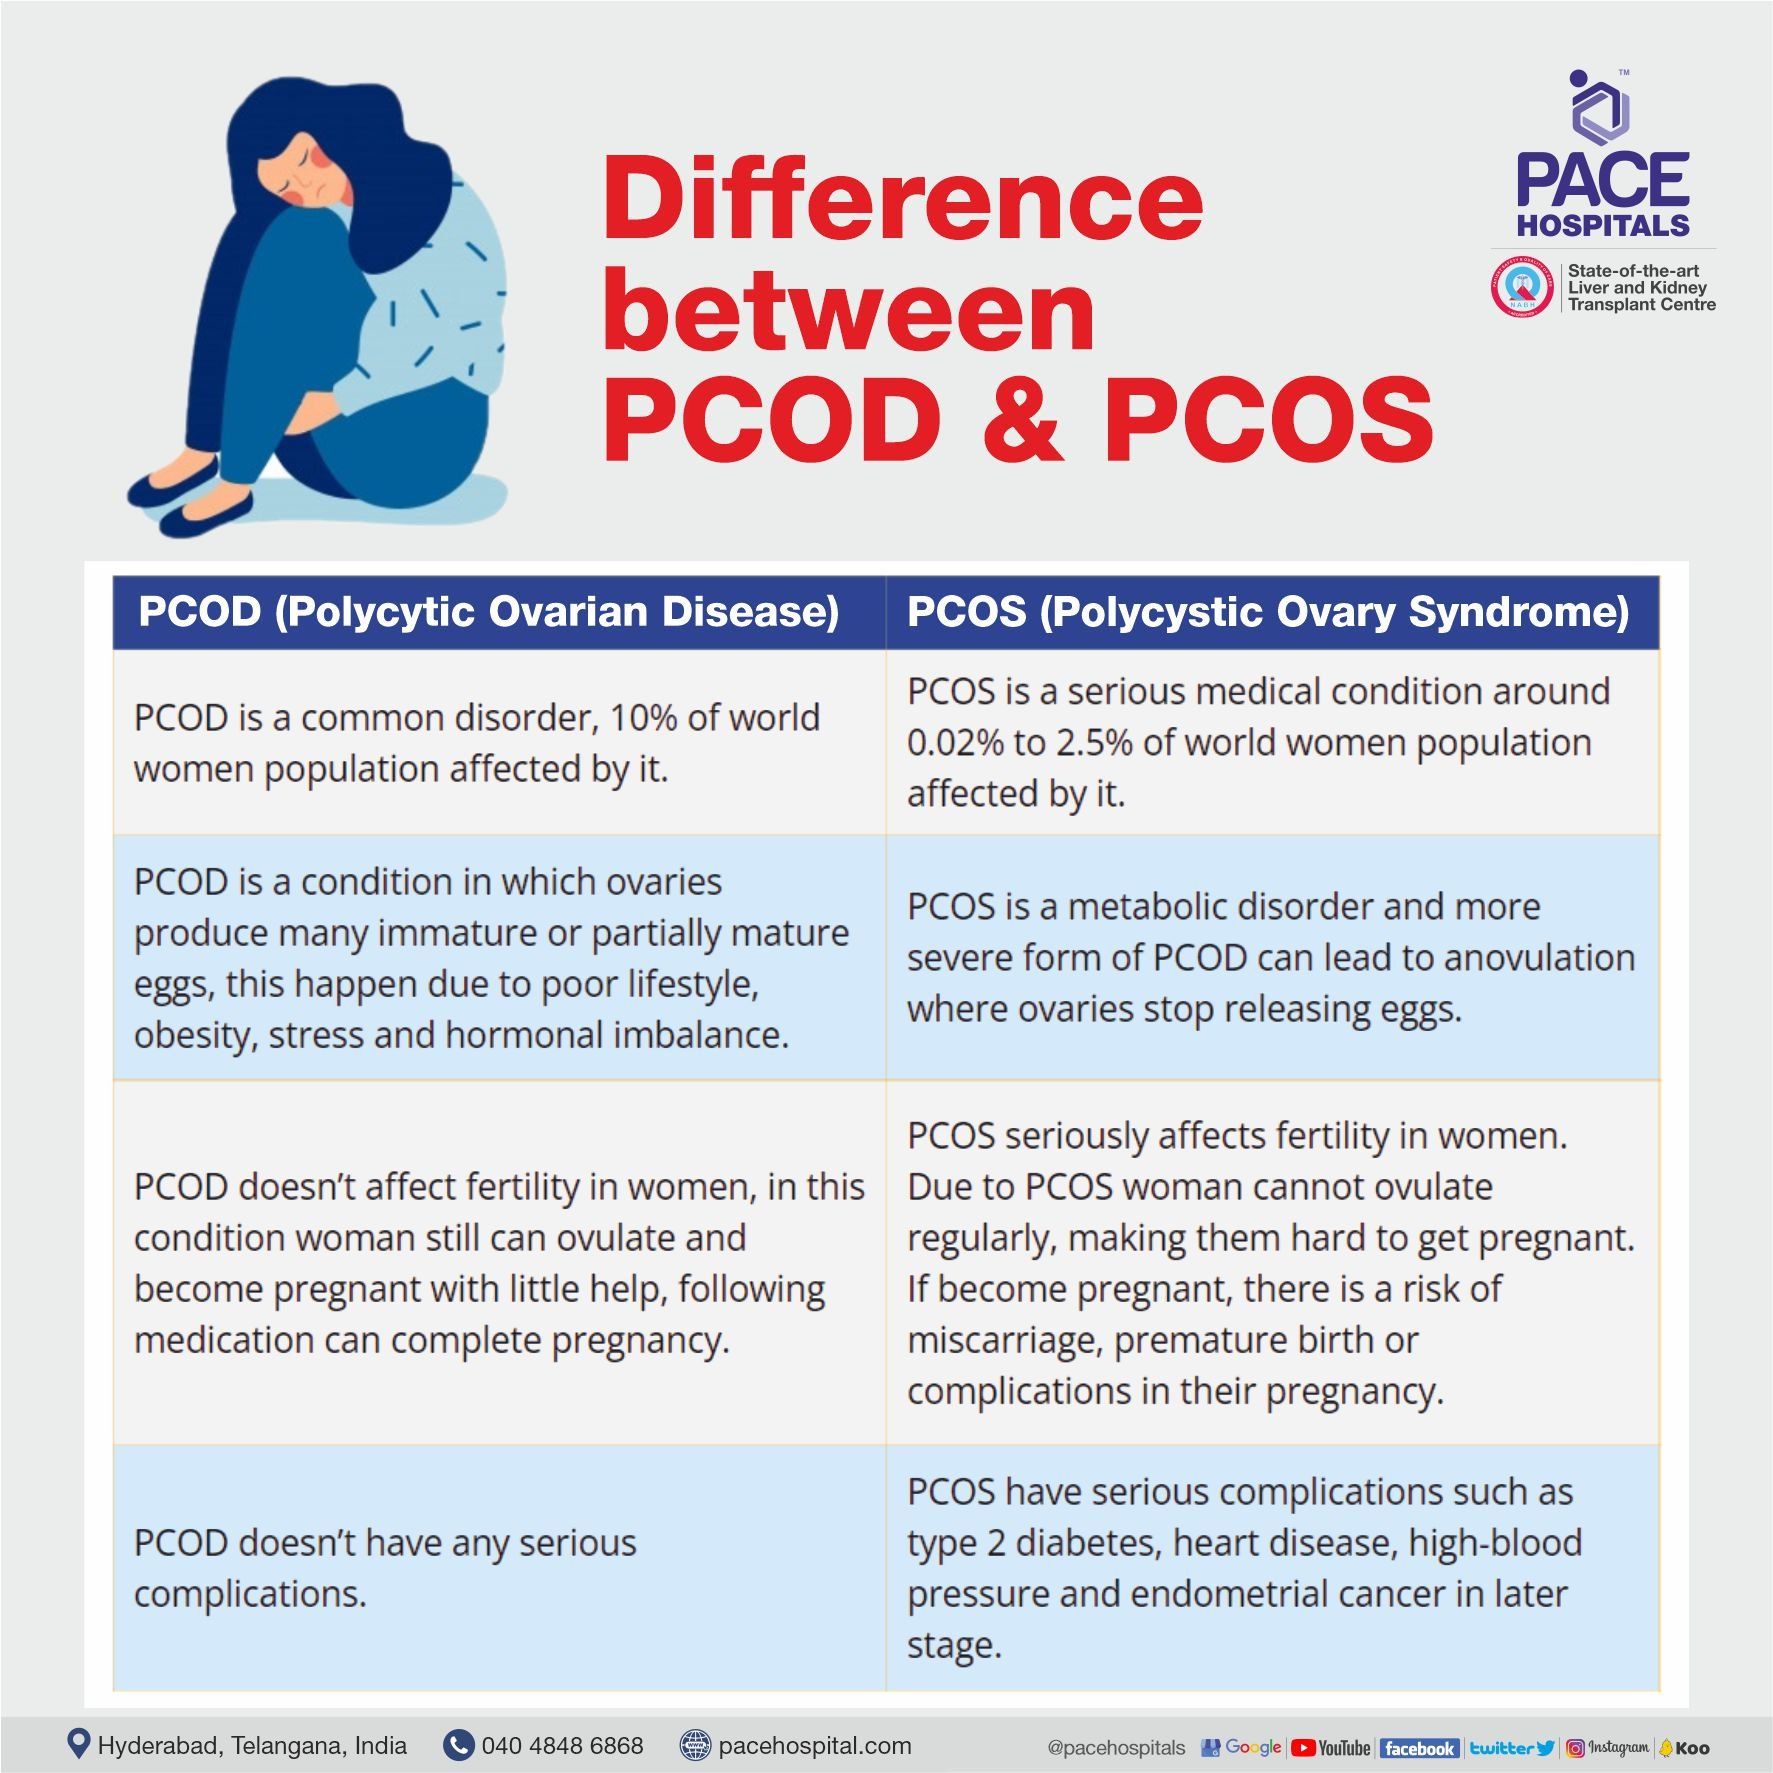 What are the differences between PCOD and PCOS